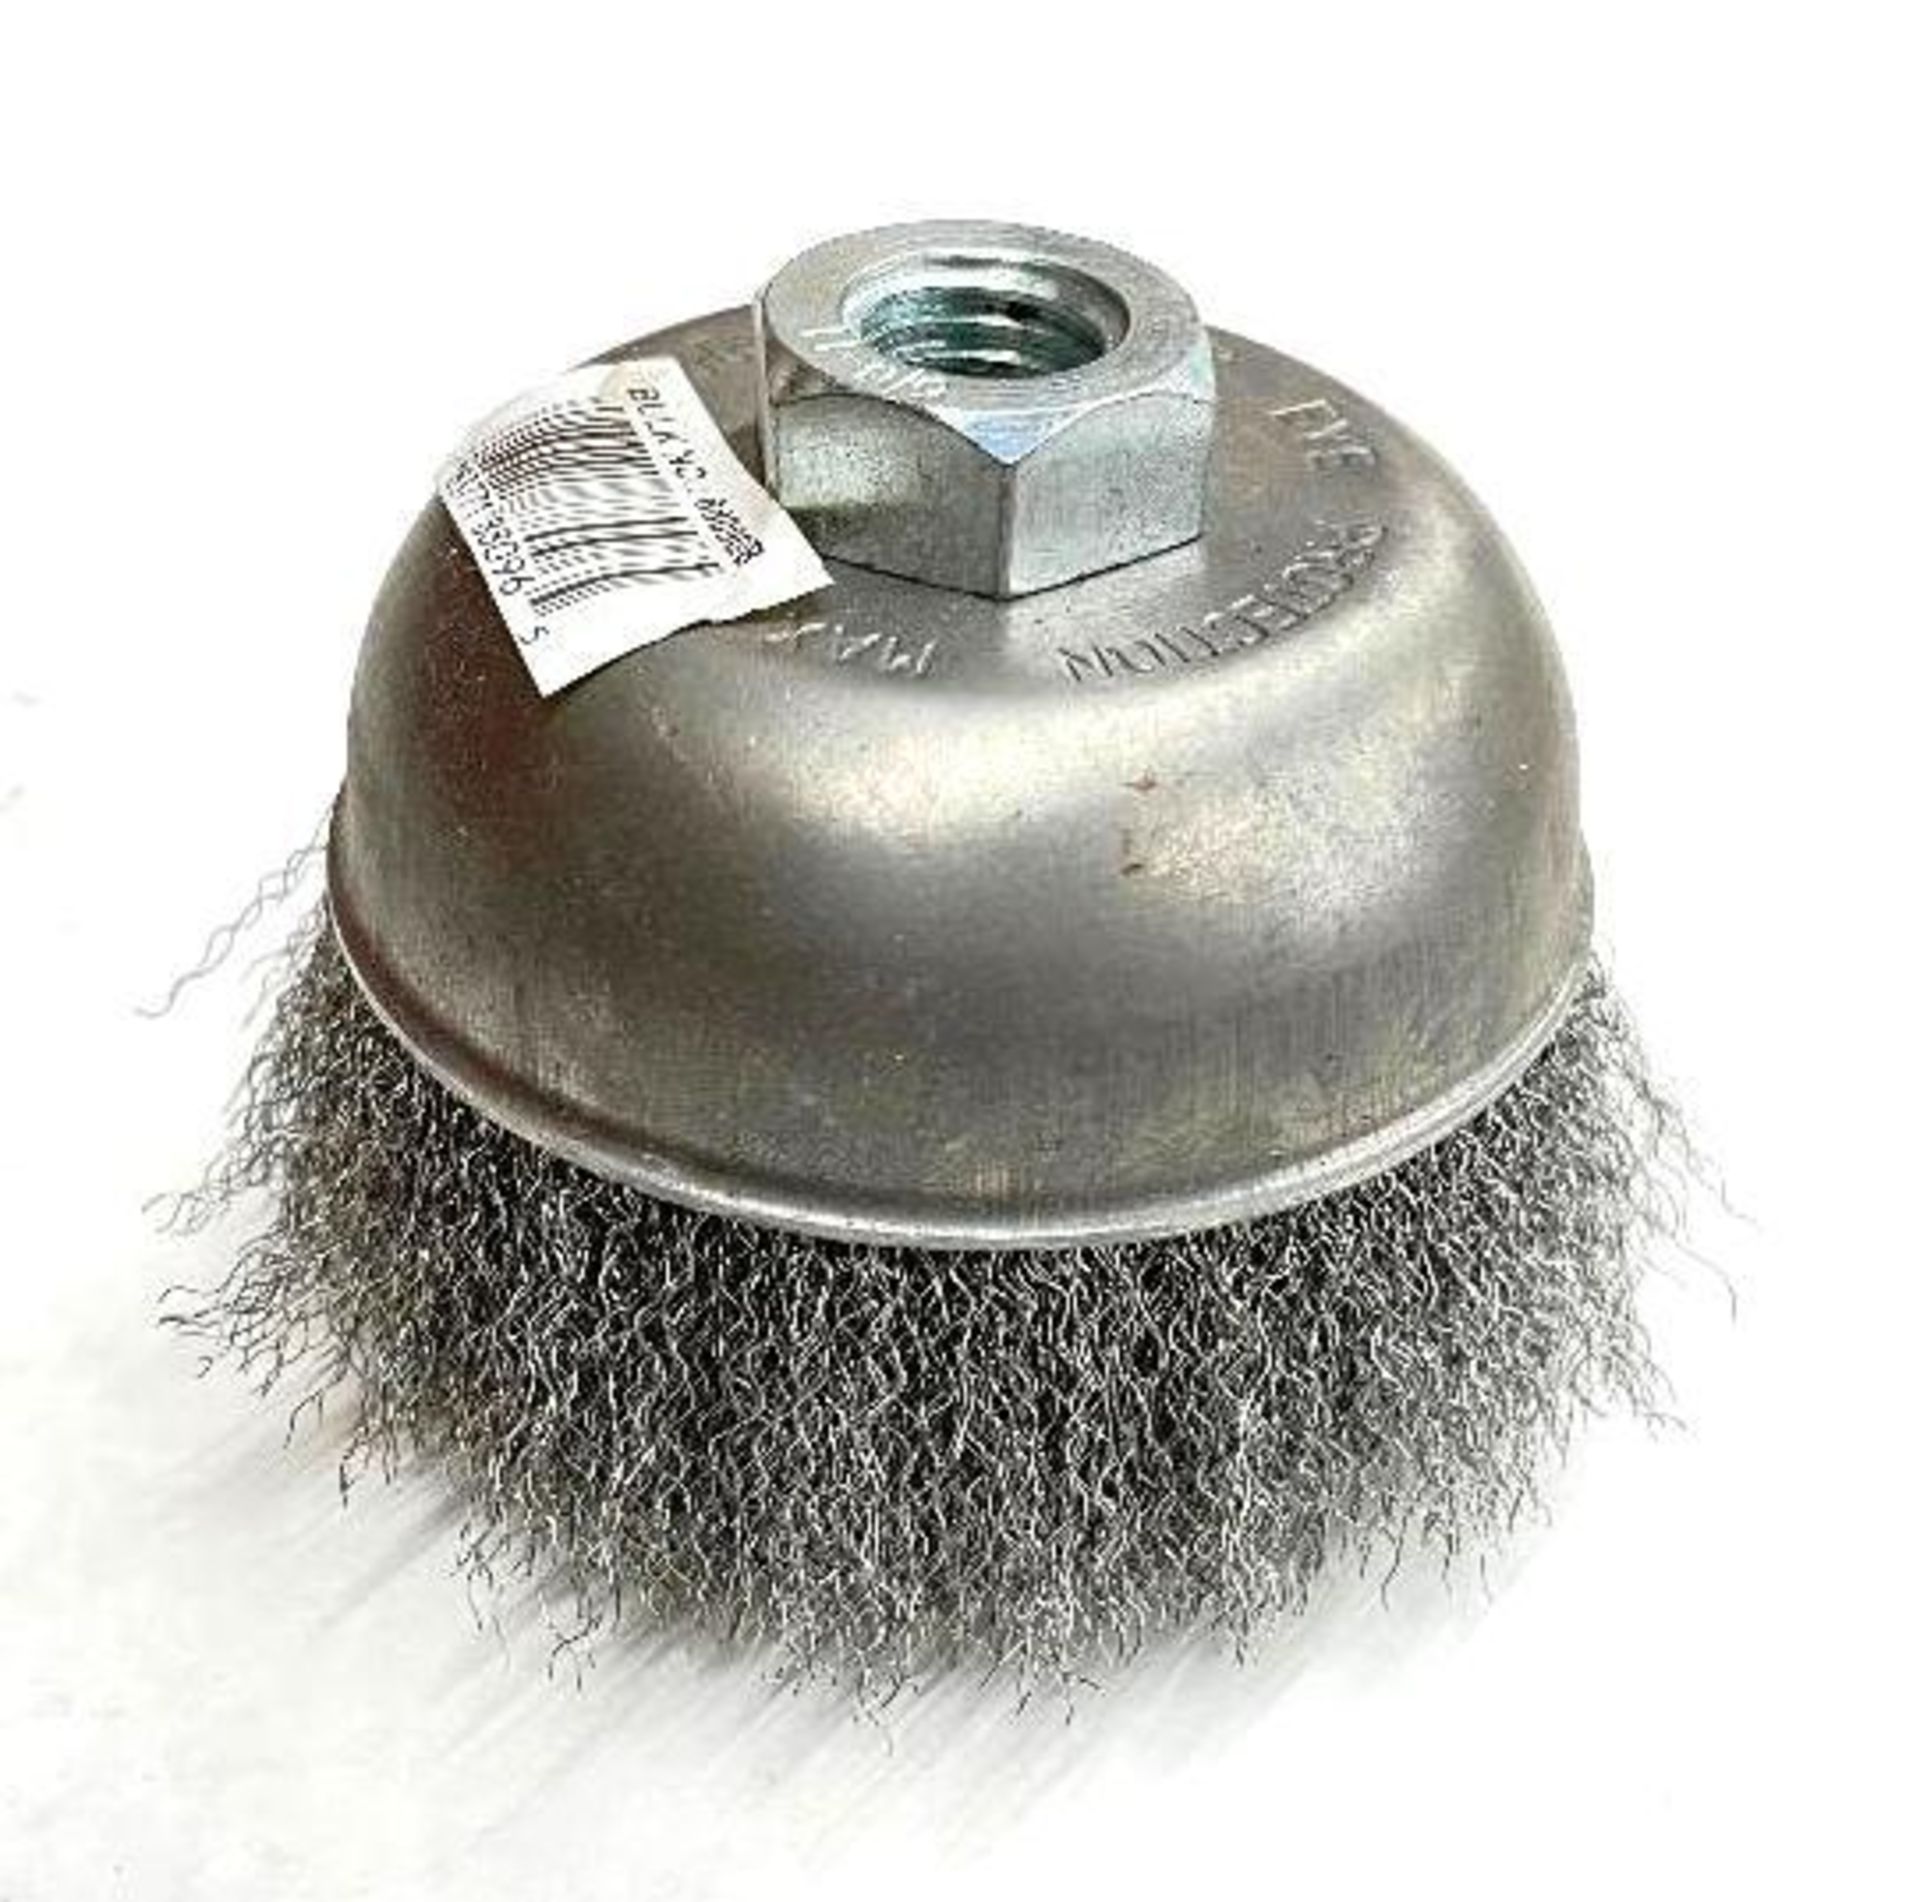 (120) 3-1/2" CRIMP FINE WIRE CUP BRUSH WITH 5/8"-11" ARBOR BRAND/MODEL EAZYPOWER 88096 RETAIL PRICE